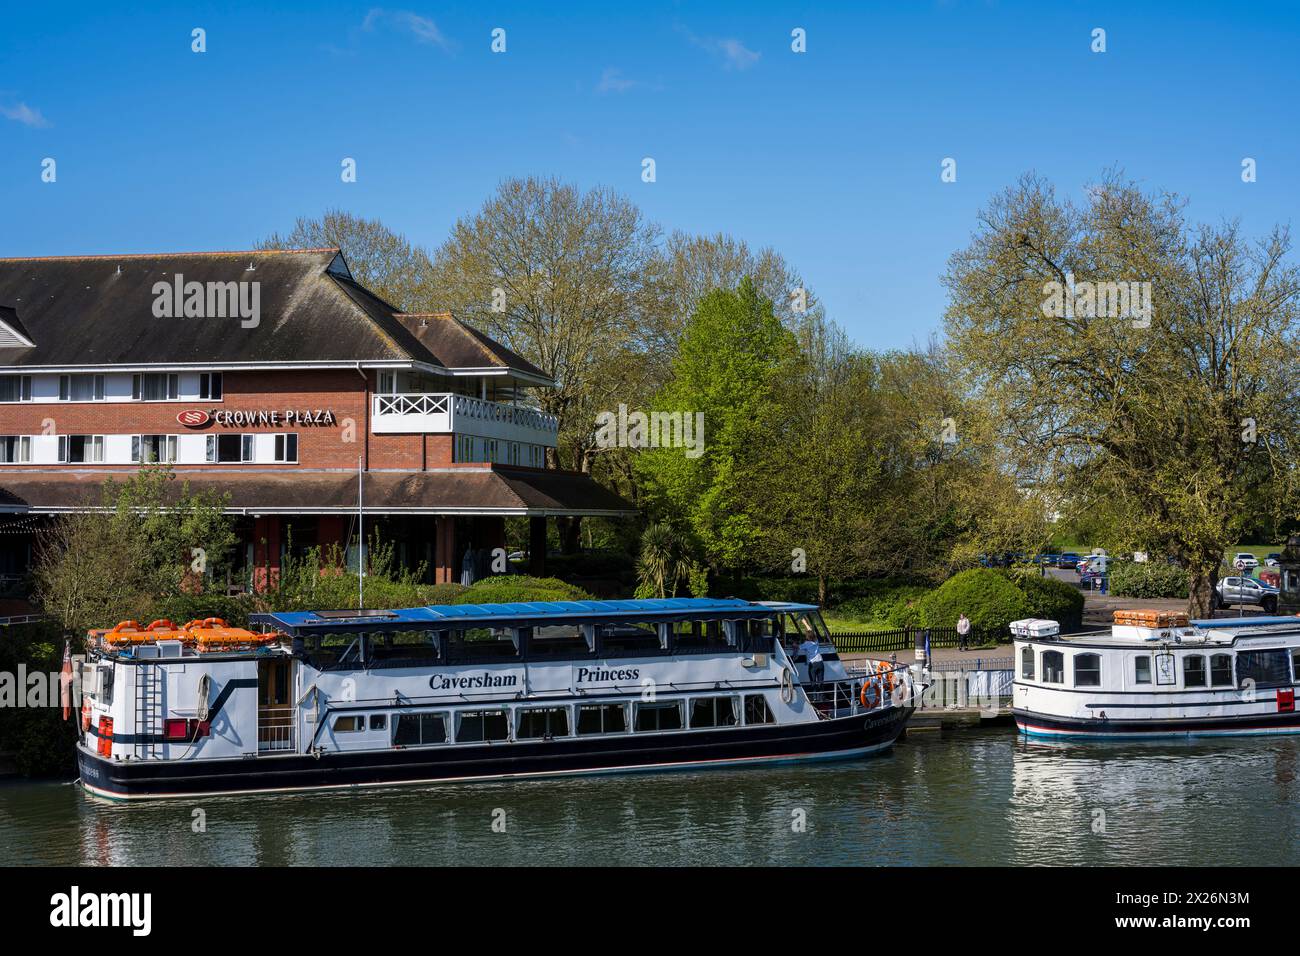 The Crown Plaza, and Caversham Princes Pleasure Boat, River Thames, Reading, Berkshire, Angleterre, UK, GB. Banque D'Images